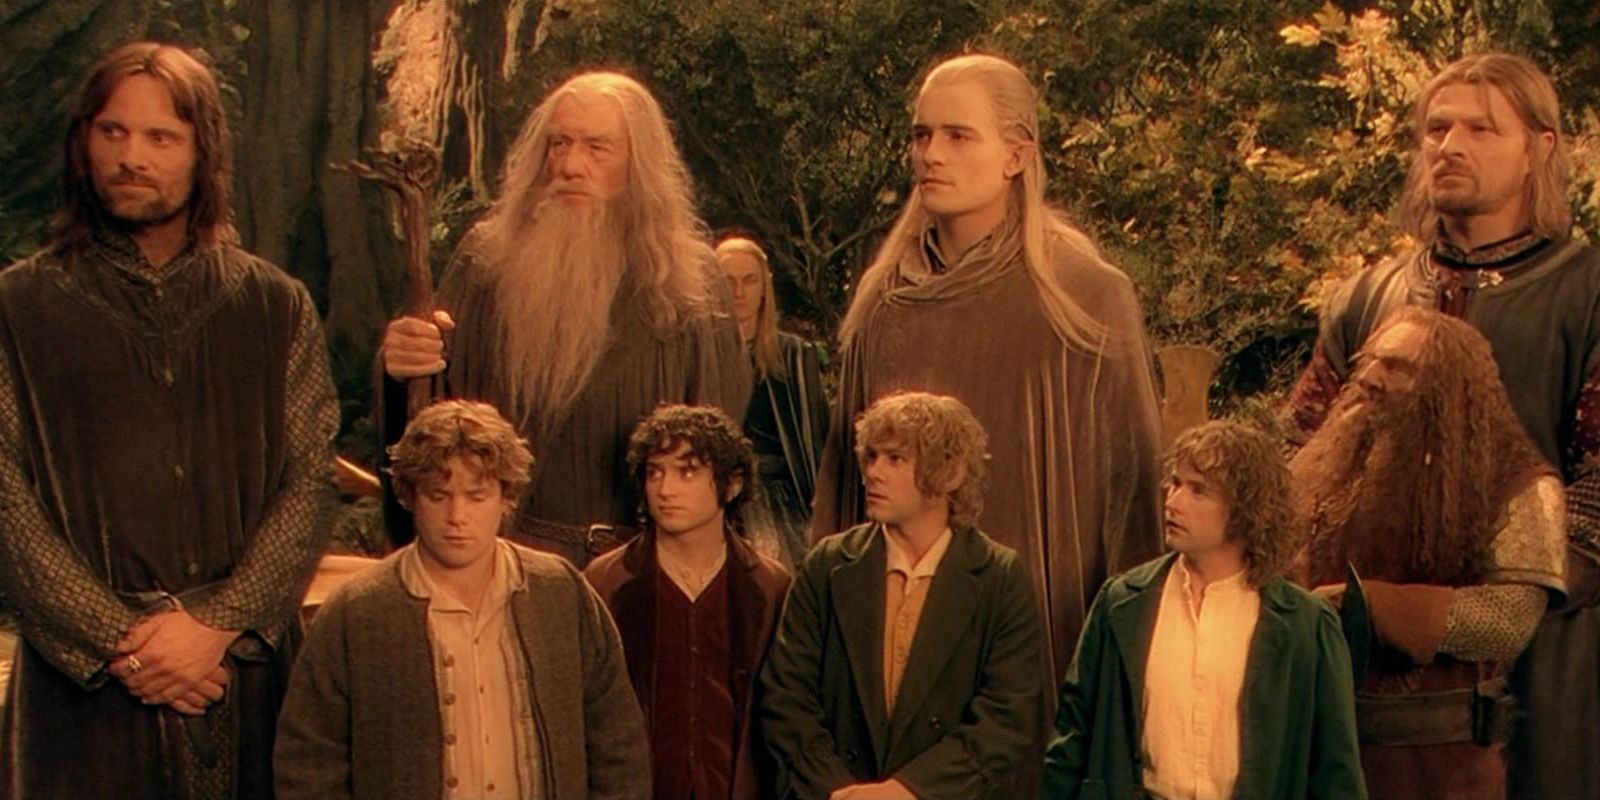 The Fellowship of the Ring is formed